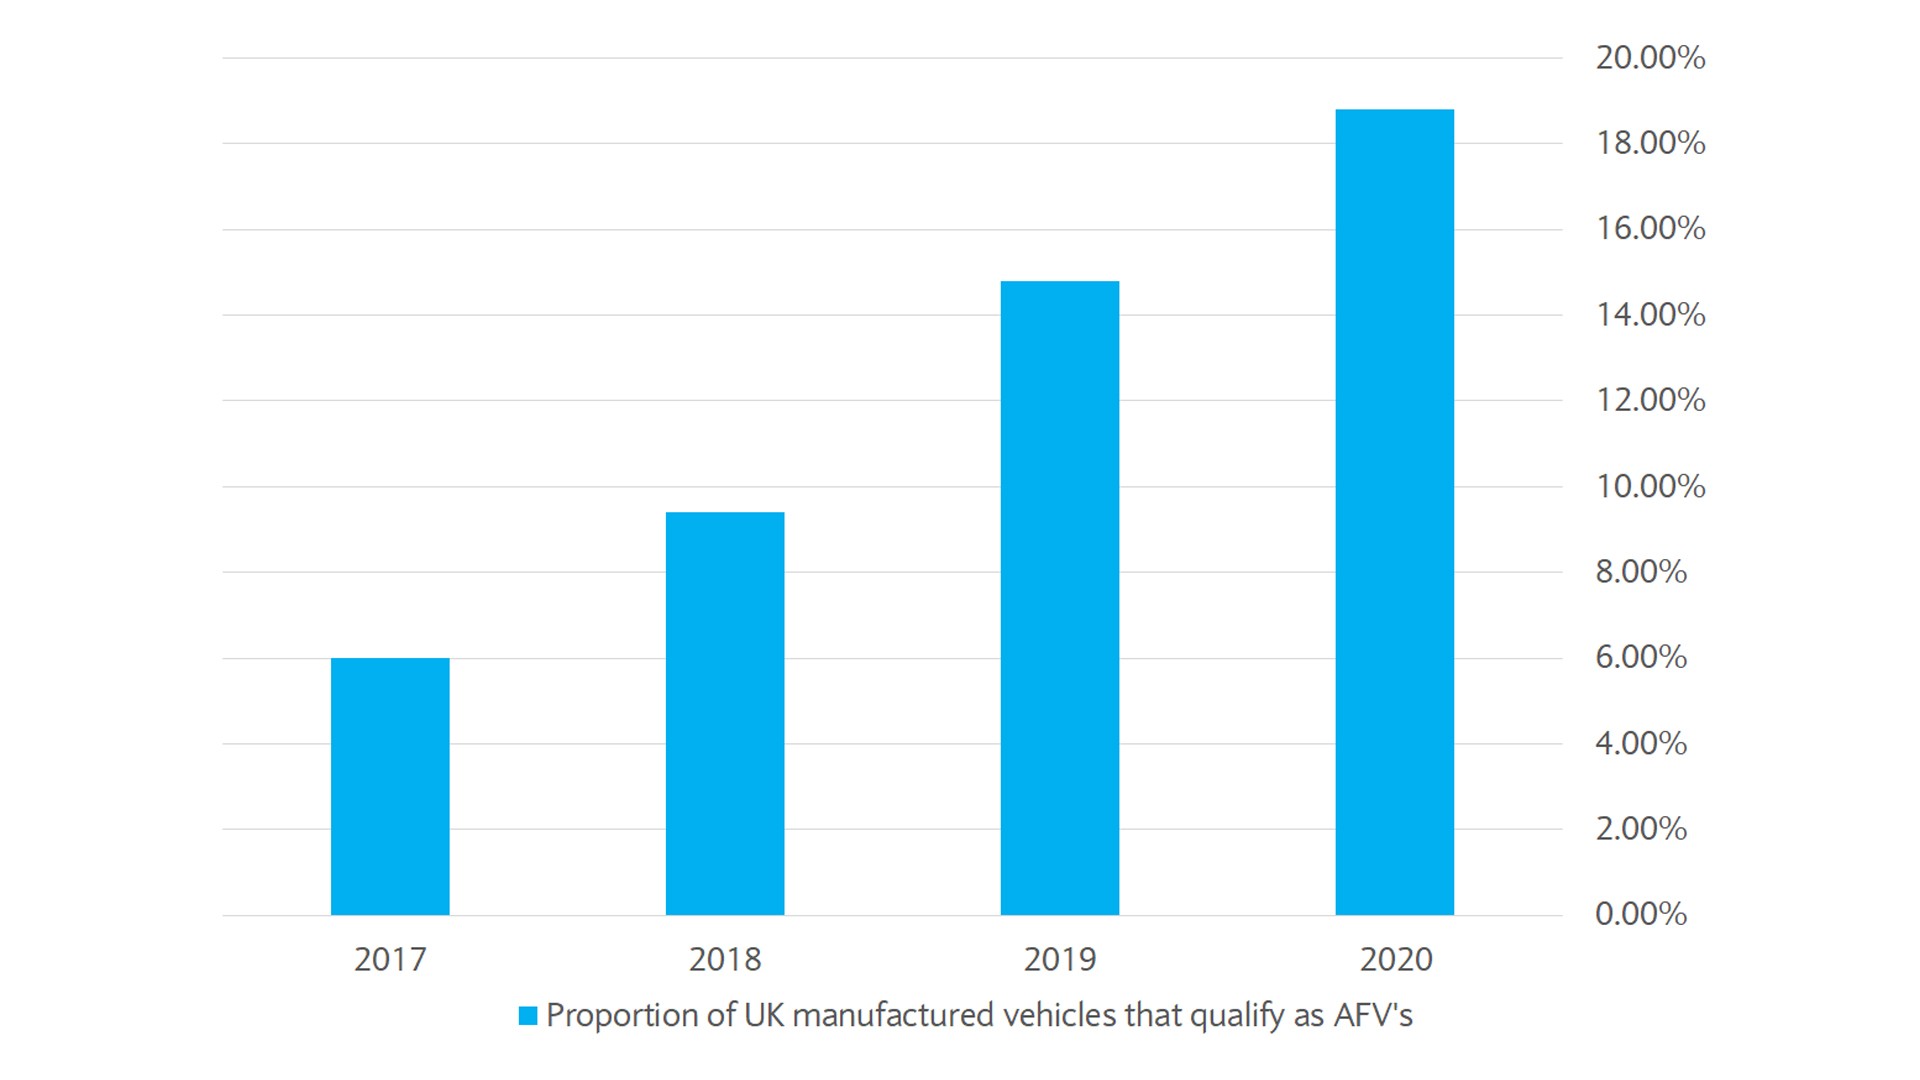 Proportion of UK manufactured vehicles that qualify as AFV's